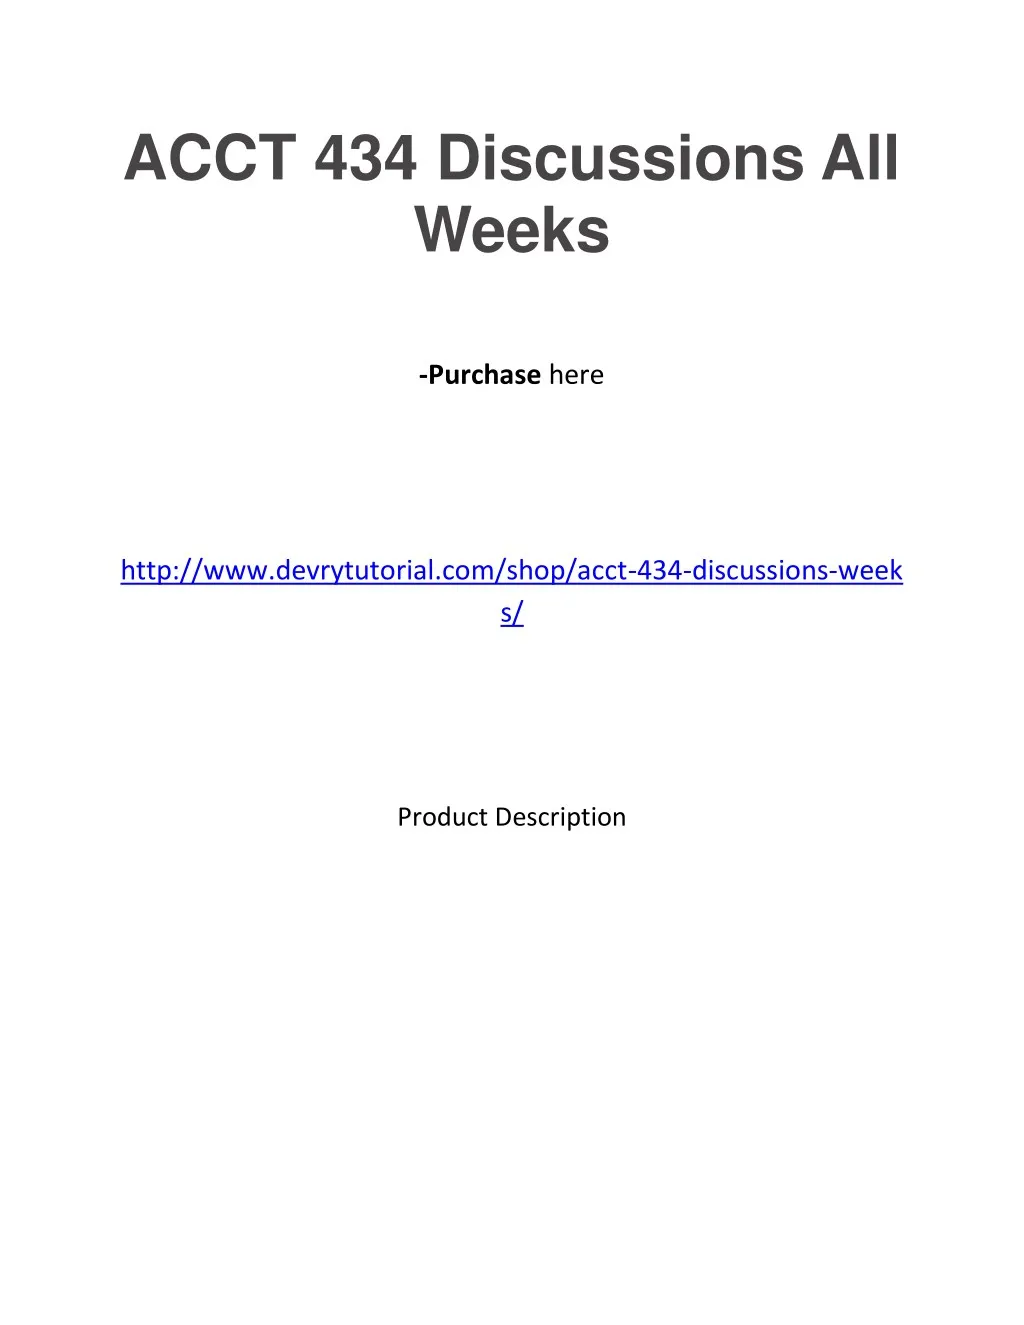 acct 434 discussions all weeks